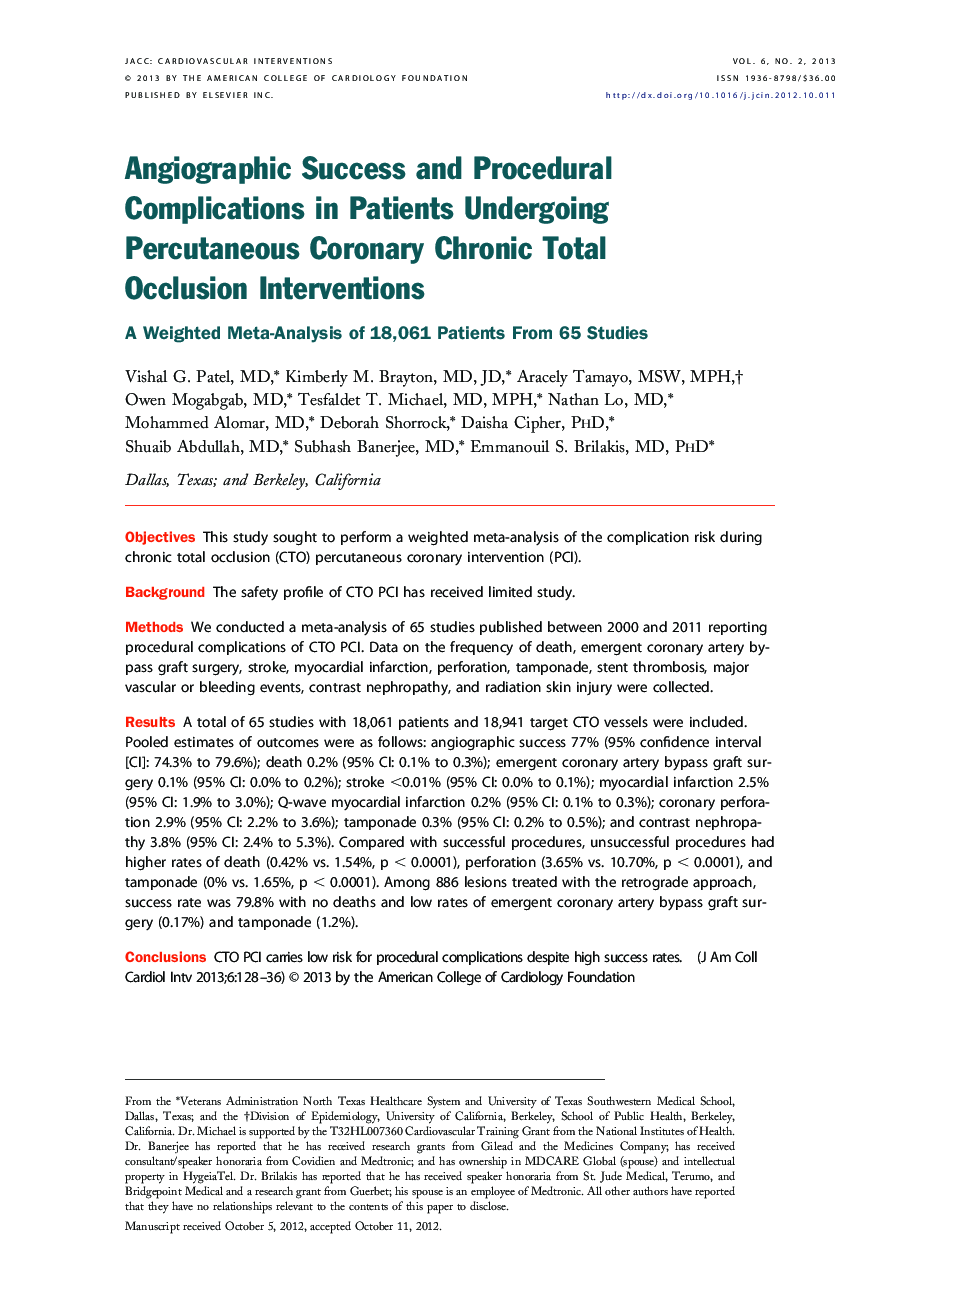 Angiographic Success and Procedural Complications in Patients Undergoing Percutaneous Coronary Chronic Total Occlusion Interventions : A Weighted Meta-Analysis of 18,061 Patients From 65 Studies